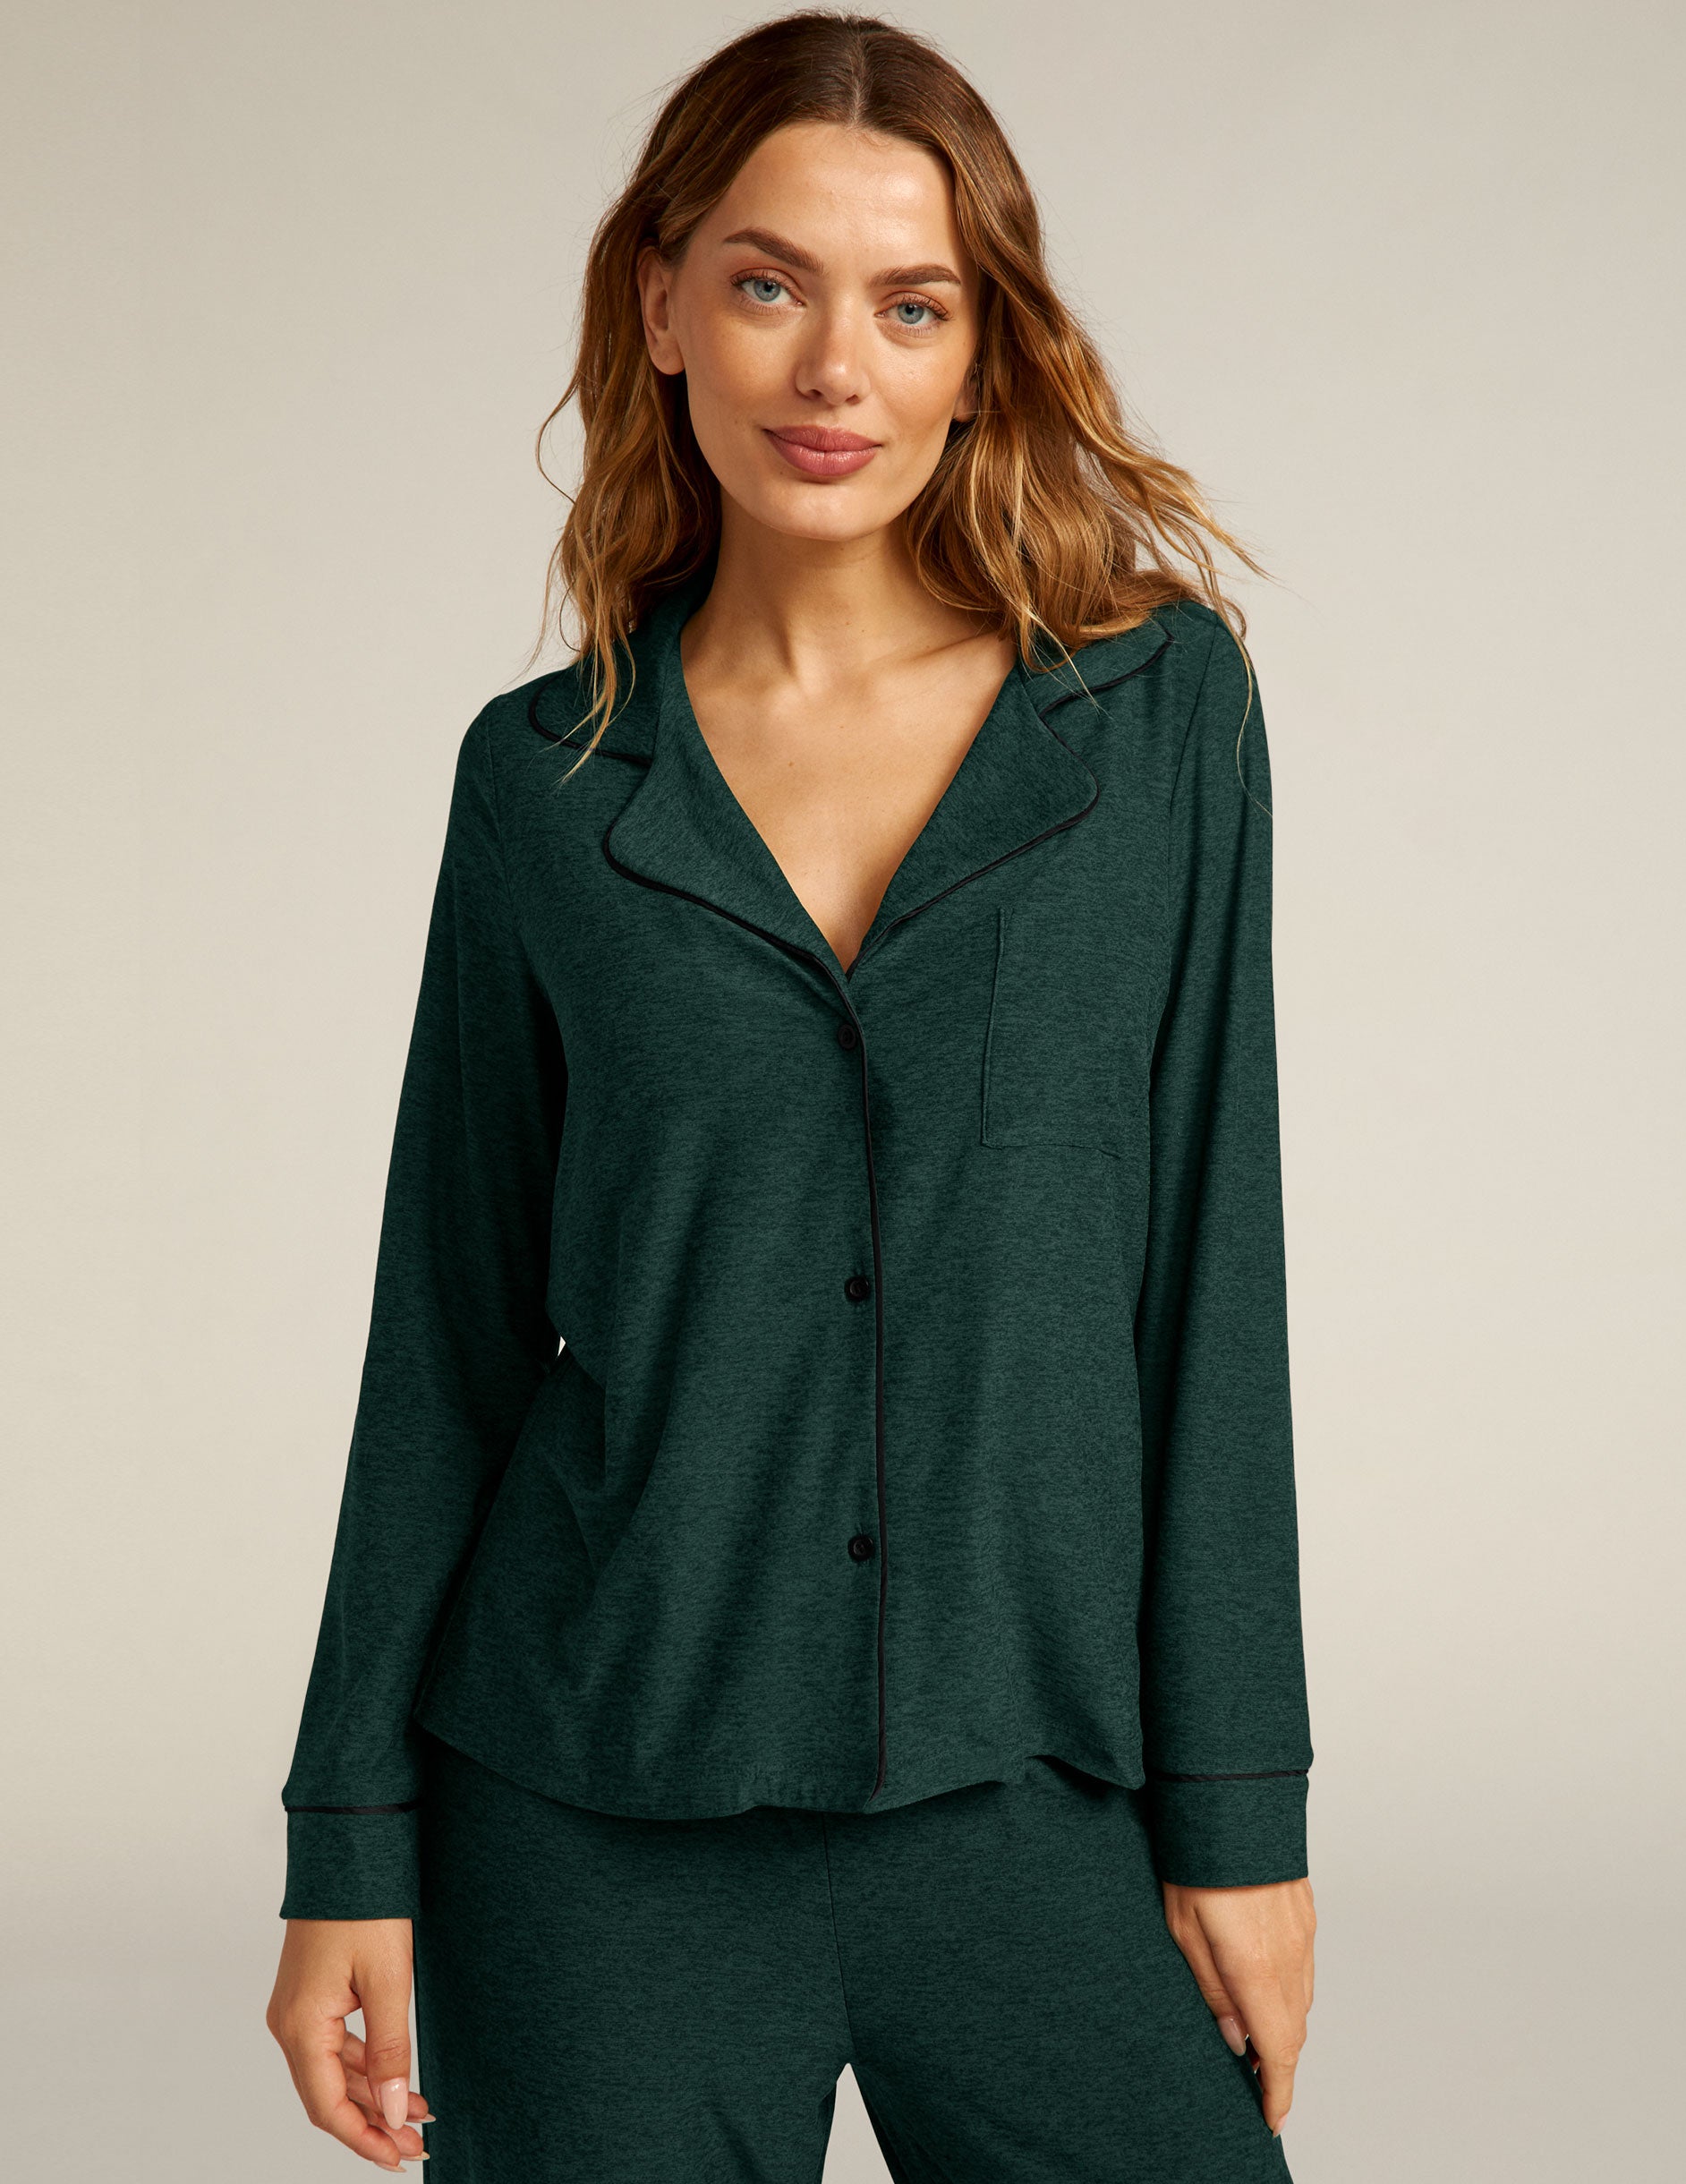 green button up sleep shirt with black piping. 